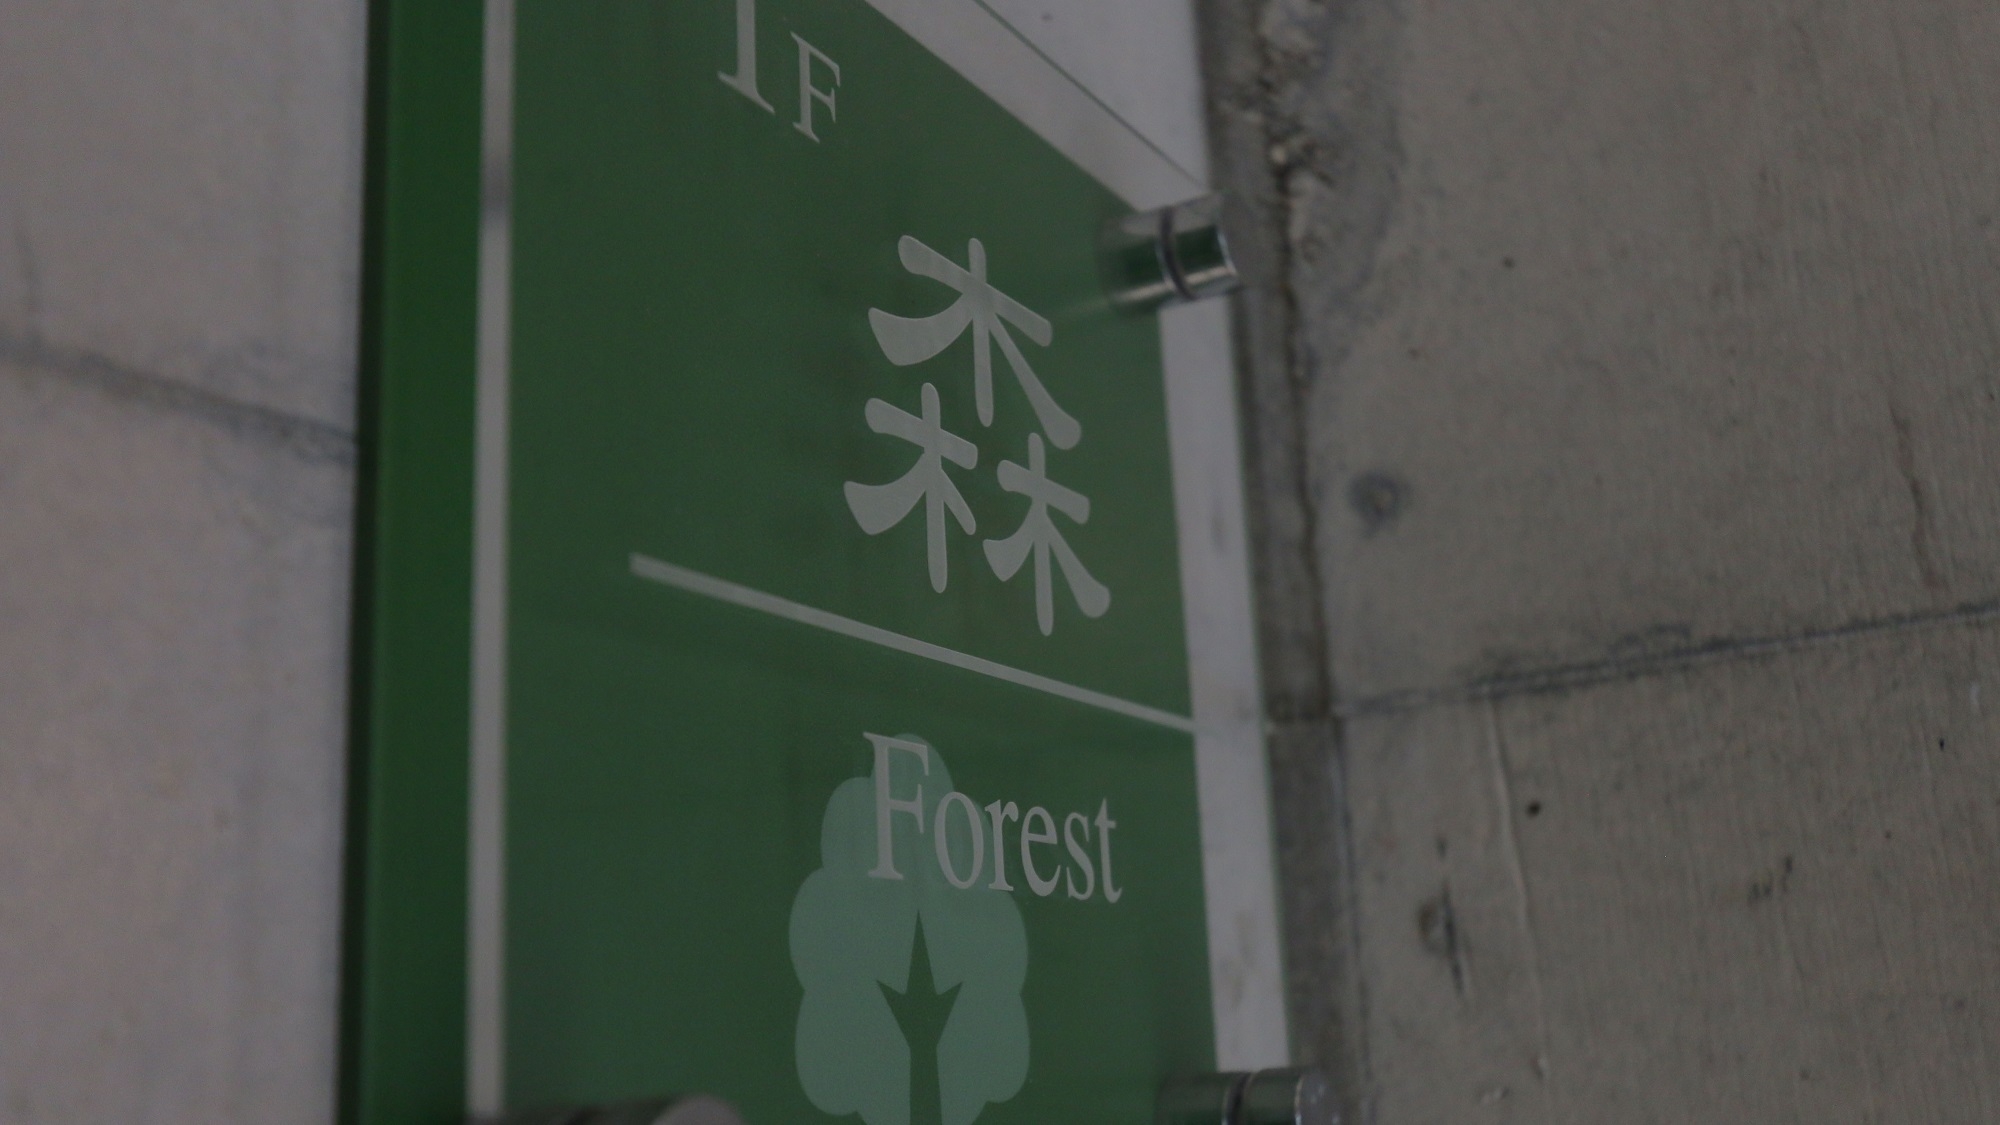 １F - 森 - Forest -